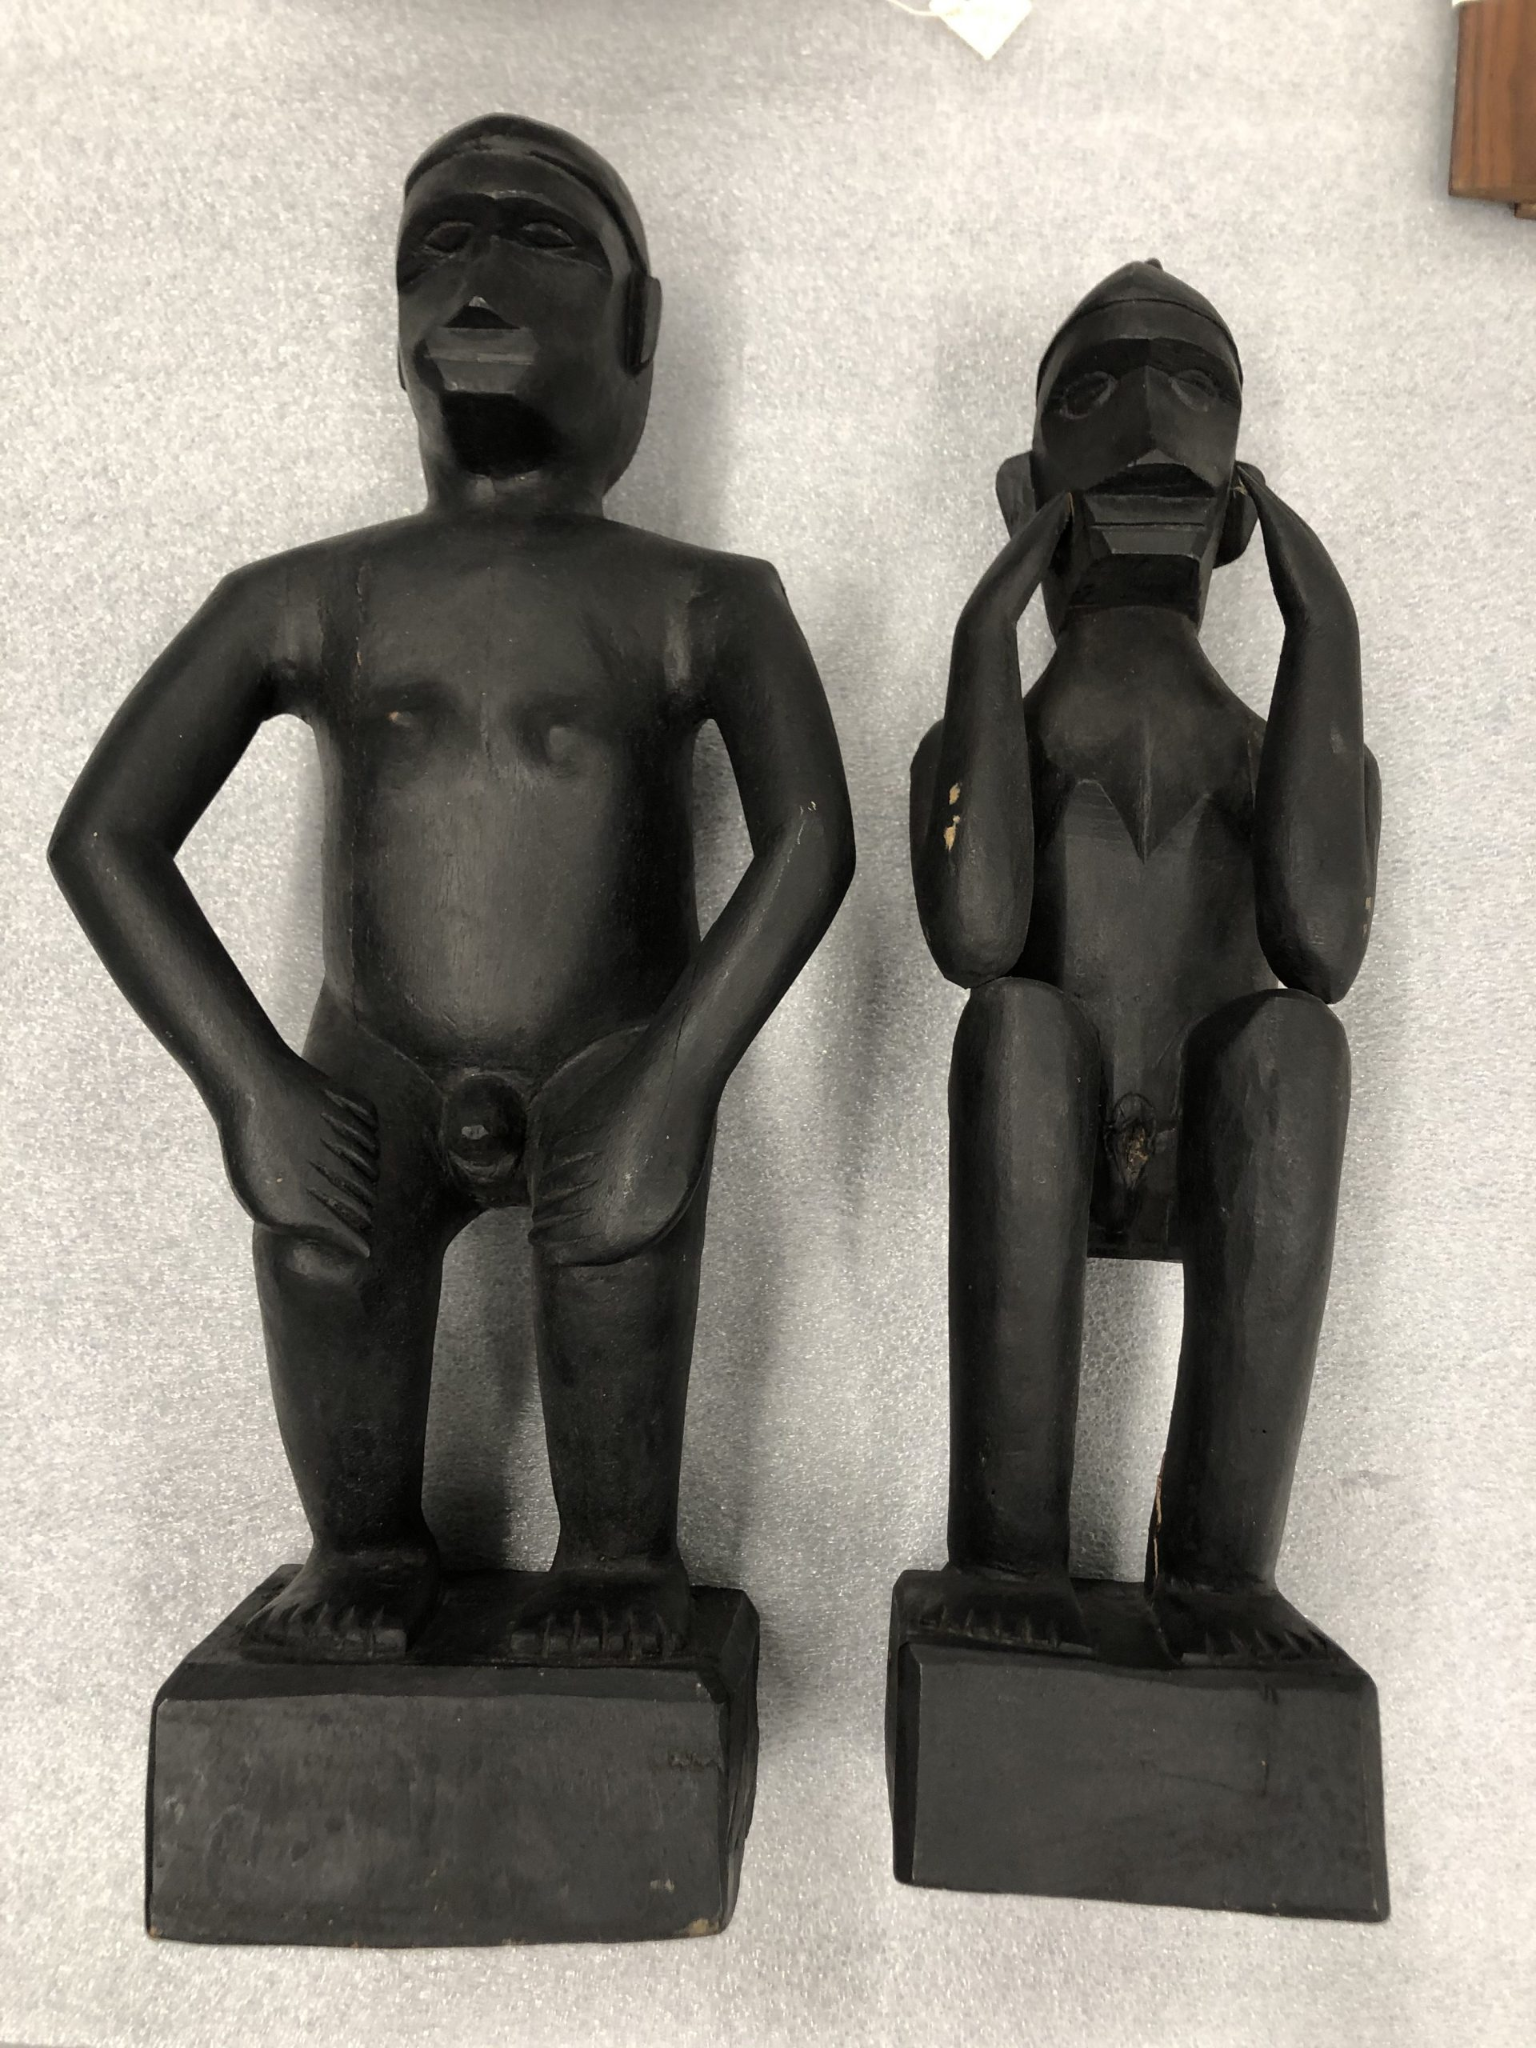 Image of Bulul Figures by Ifugao Maker(s) of the Philippines.